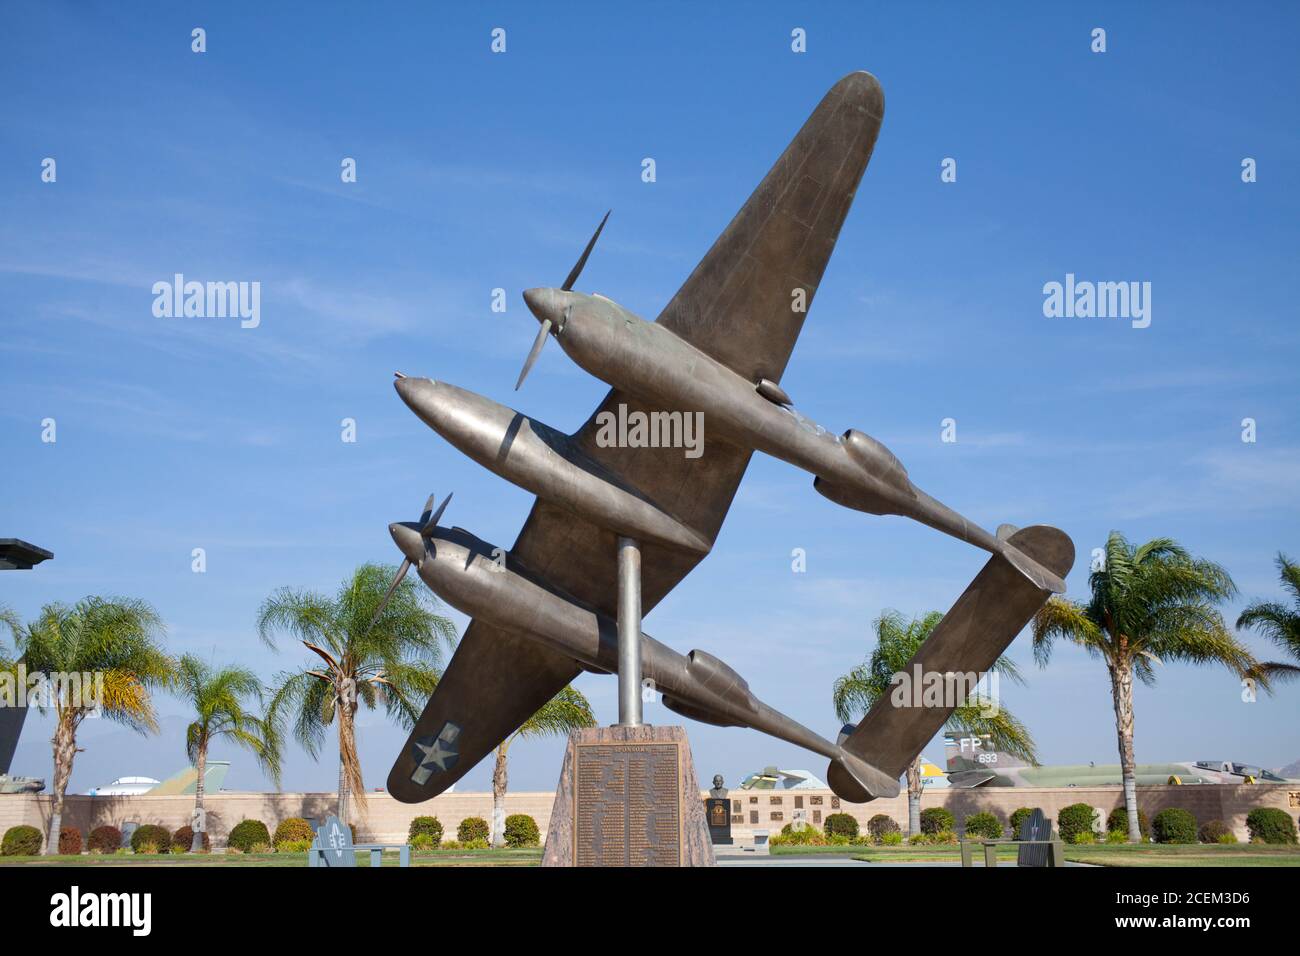 Memorial sculpture commemorating the P39 Lightning WWII aircraft. Stock Photo